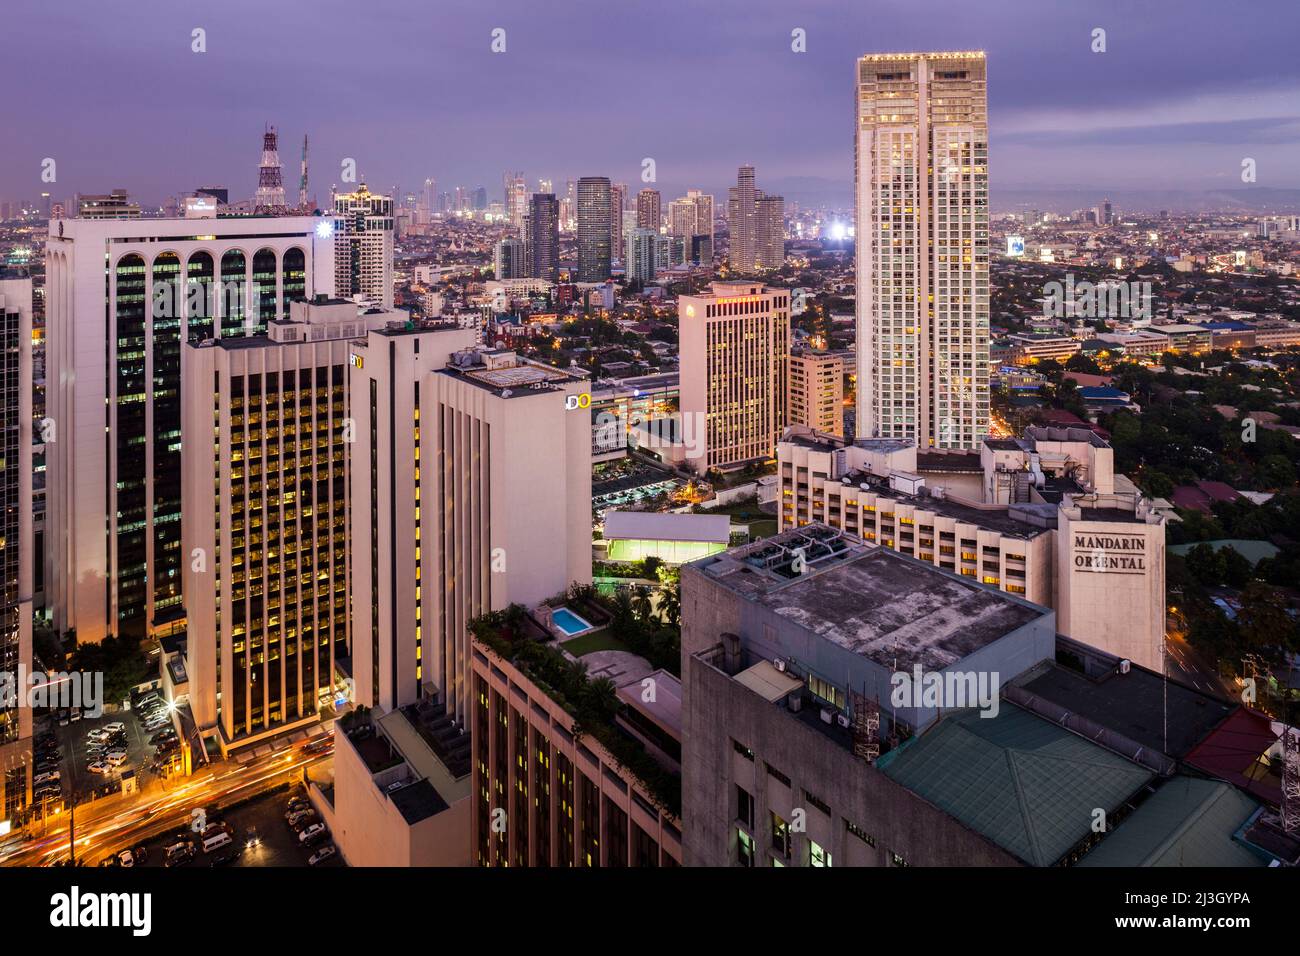 Philippines, Metro Manila, Makati District, elevated view of skyscrapers and Mandarin Oriental Hotel at dusk Stock Photo